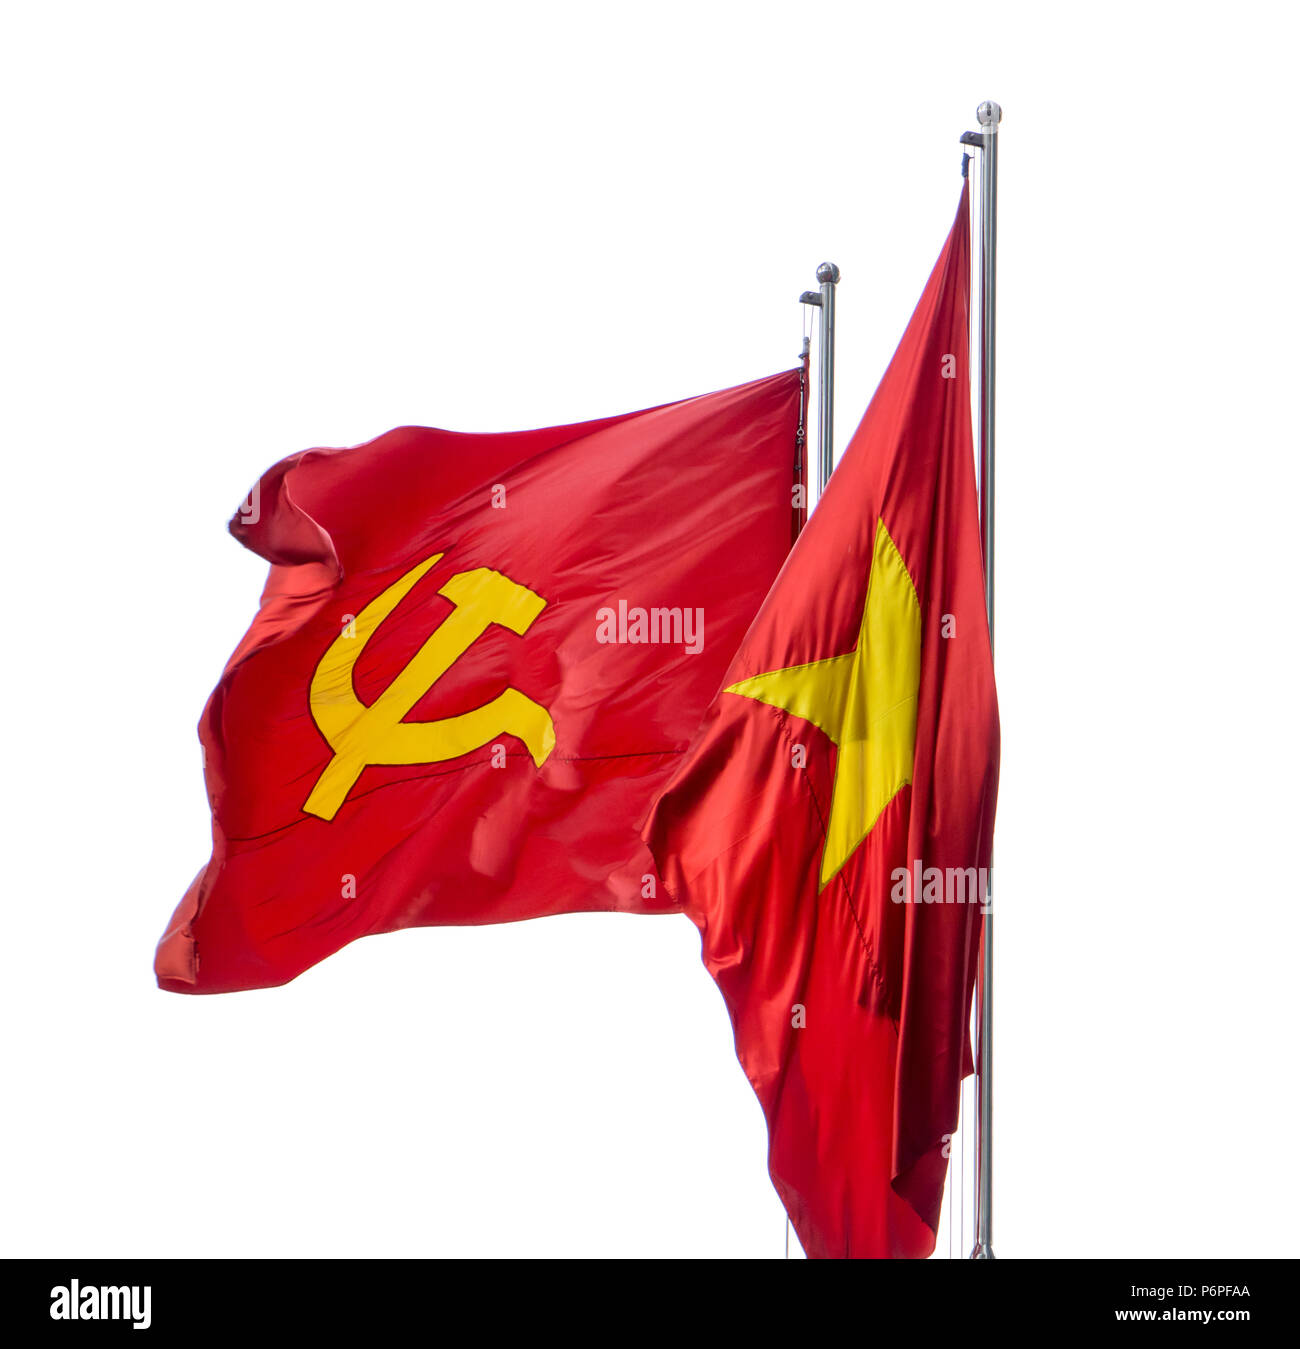 The red flag with communist symbols of a sickle and a hamme.The Red flag with a five-pointed star flutters on the pole. Stock Photo